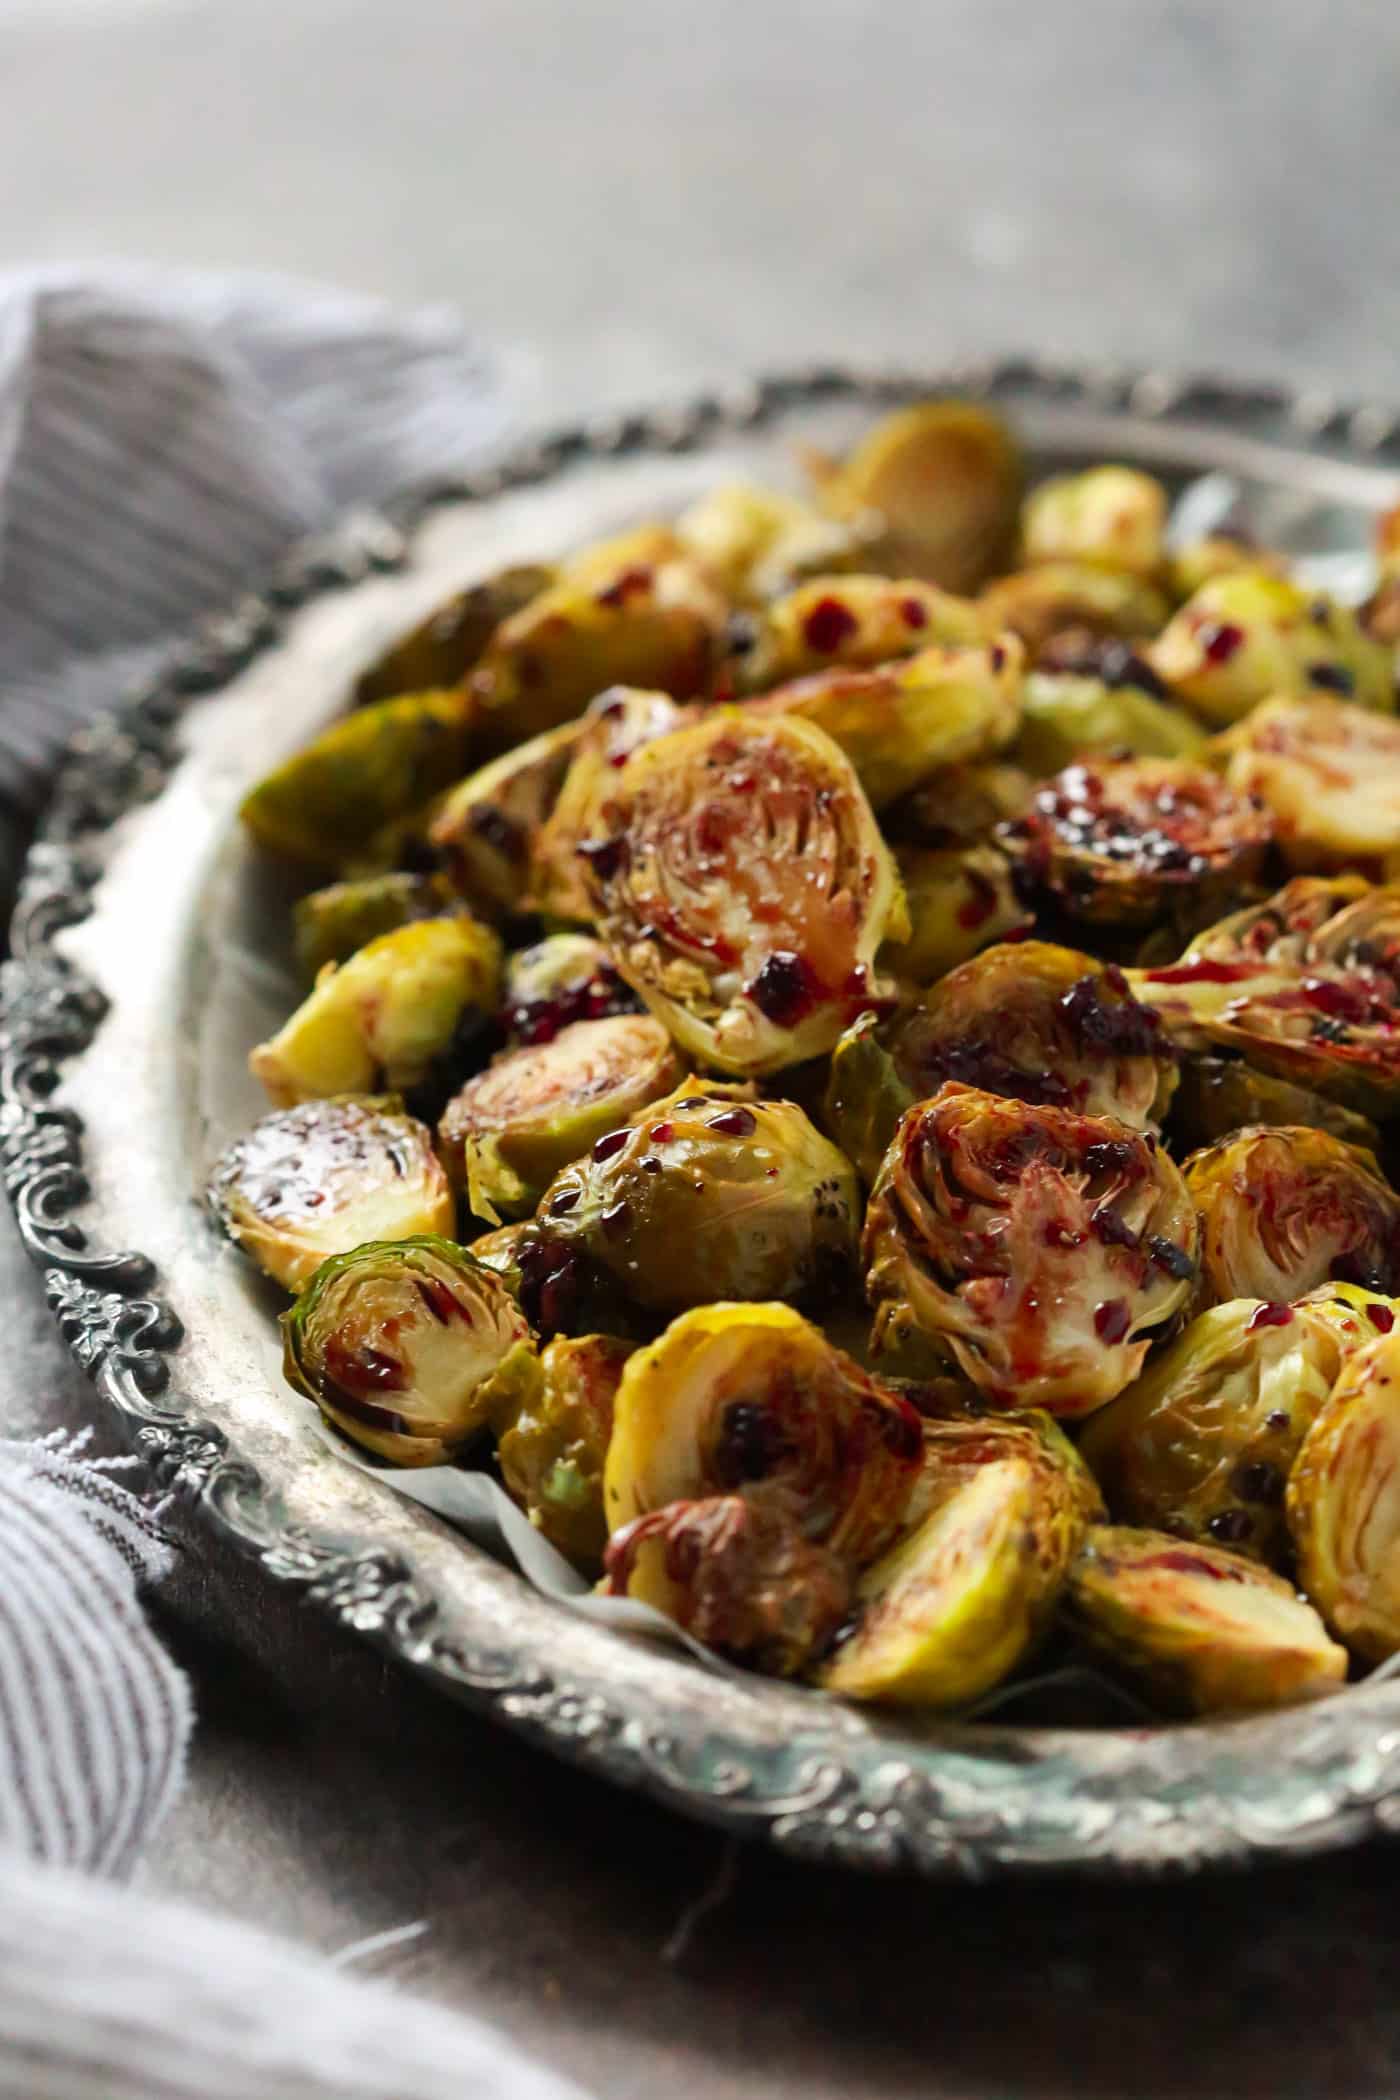 These Pomegranate Glazed Brussels Sprouts are made in the oven and toss with a 2-ingredient Pomegranate glazed (pomegranate juice and soy sauce). It’s easy, quick and very delicious. 